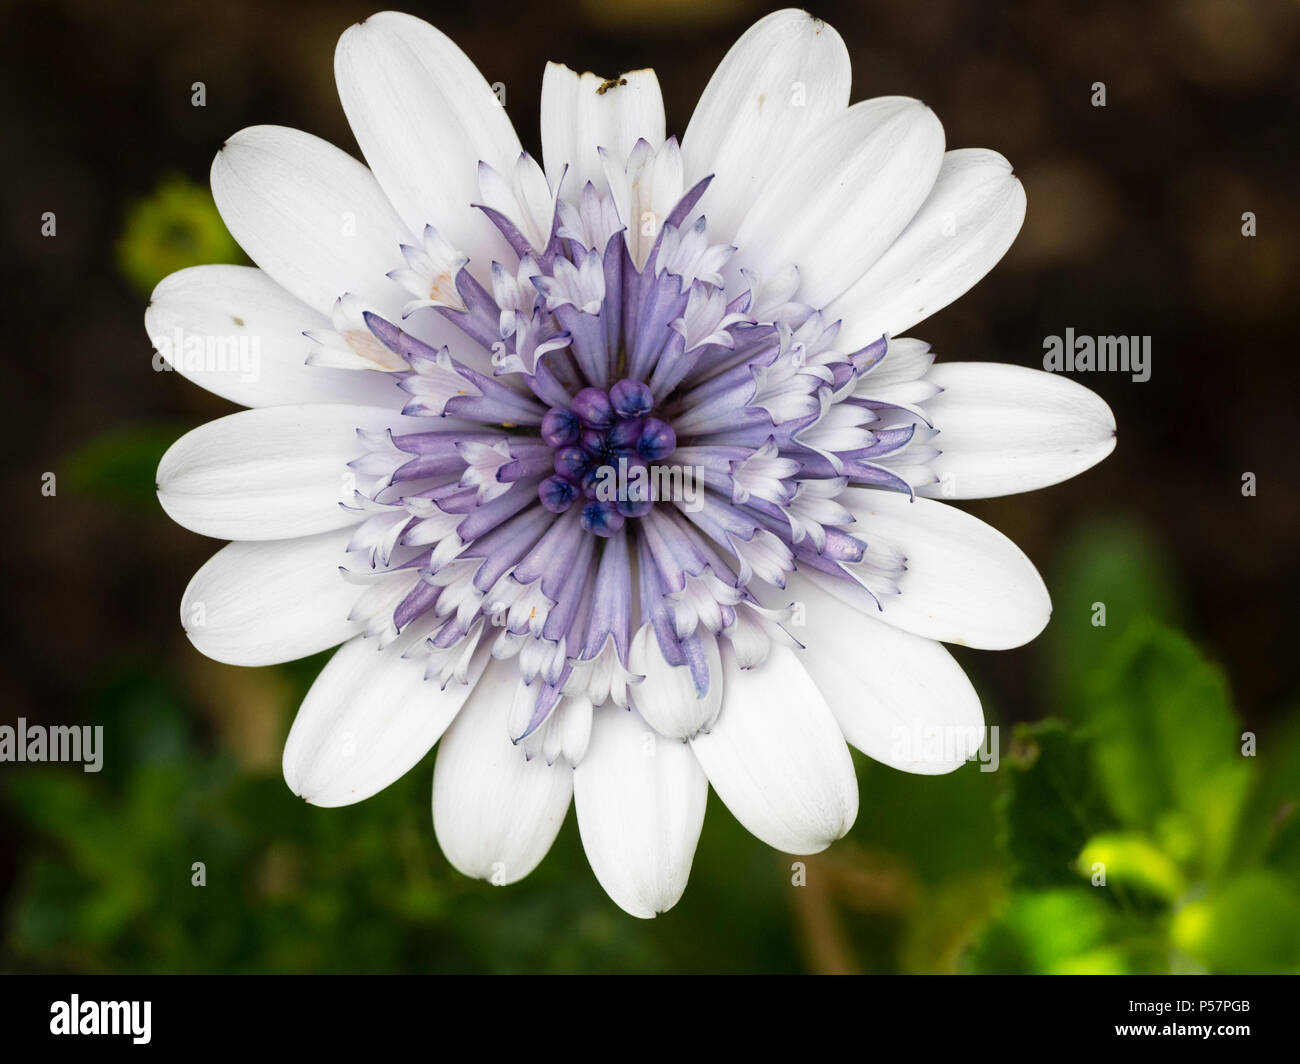 Silvery doubled centre and white ray petals of the summer blooming, half hardy perennial cape daisy, Osteospermum ecklonis '3d Silver' Stock Photo